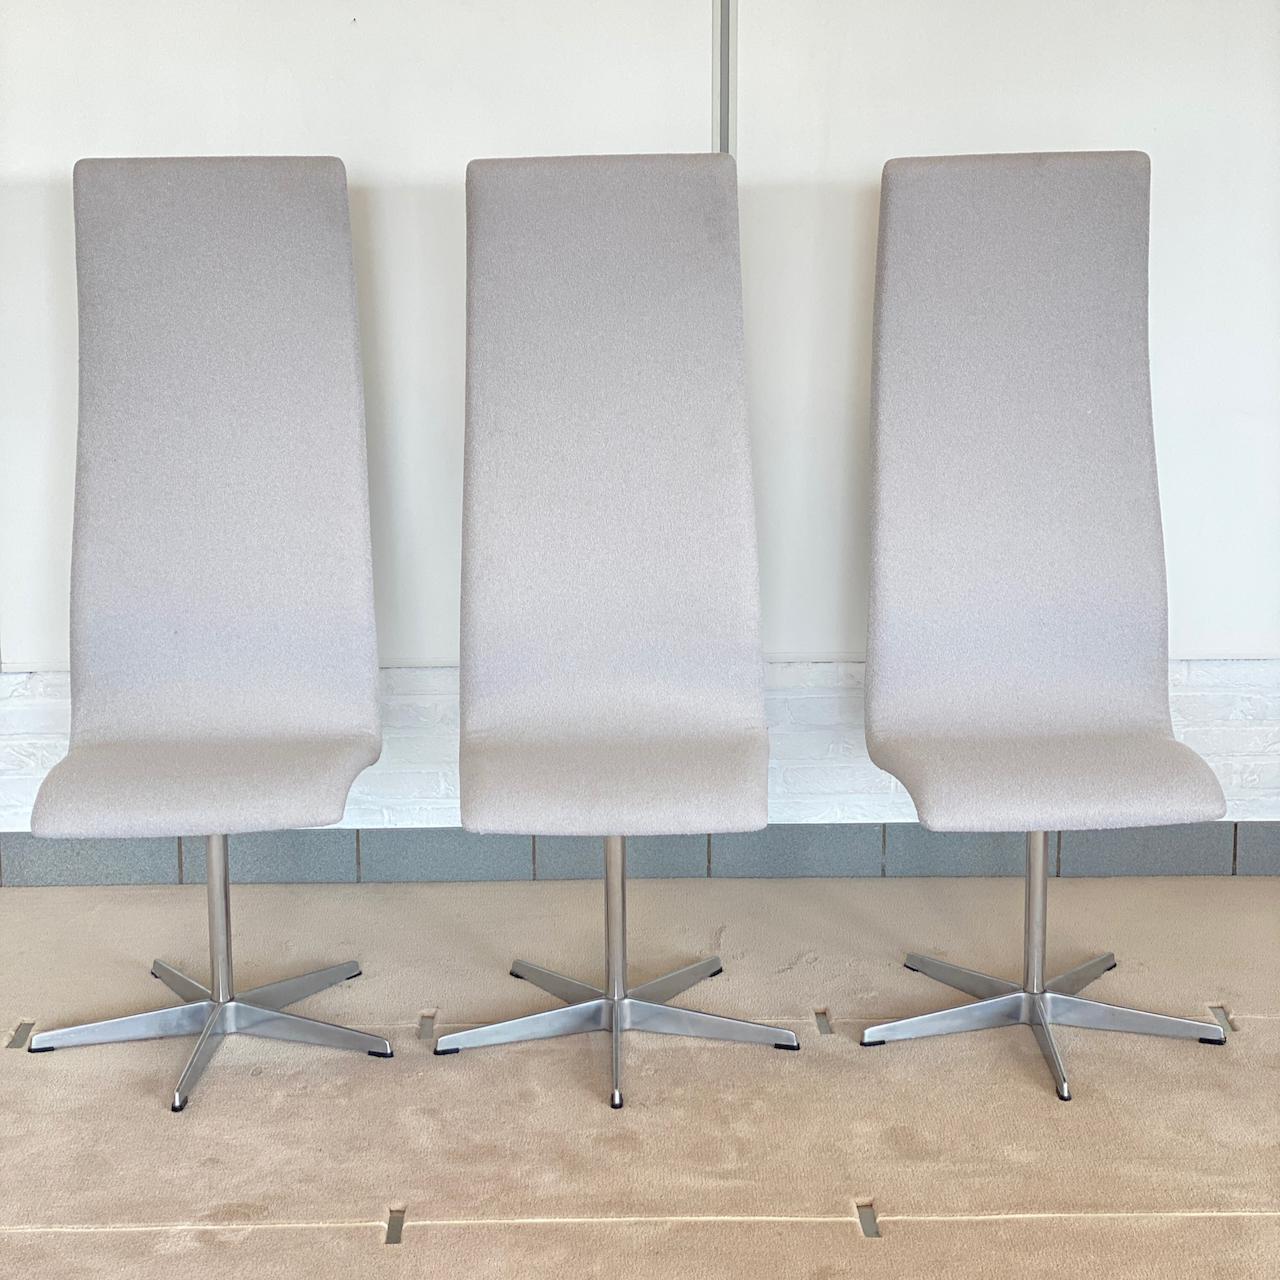 Danish Set of 6 Oxford chairs by Arne Jacobson for Fritz Hansen - Denmark 1960s For Sale